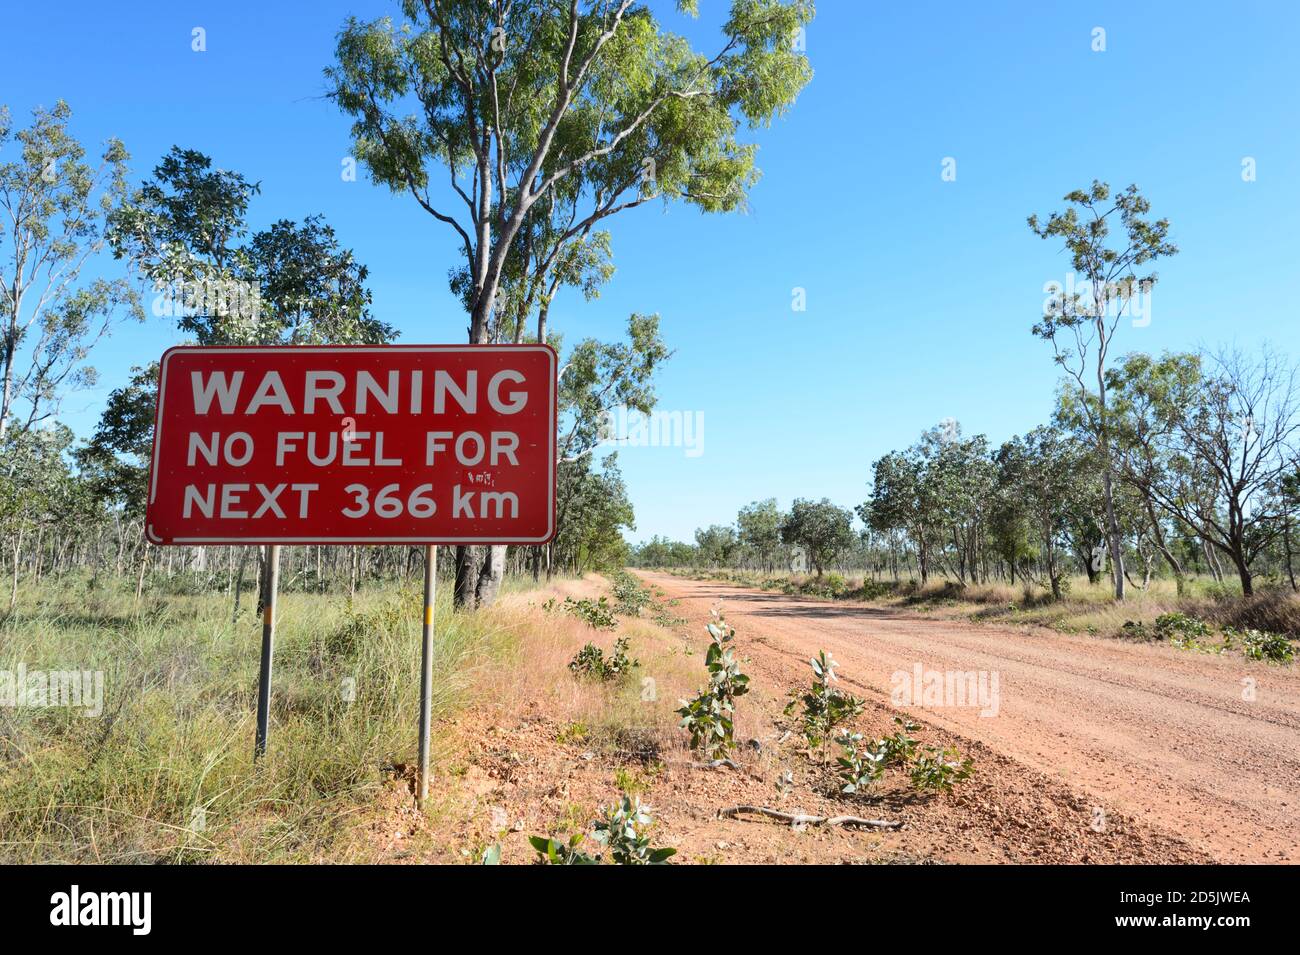 No fuel warning sign on a remote Outback dirt road near Borroloola, Northern Territory, NT, Australia Stock Photo